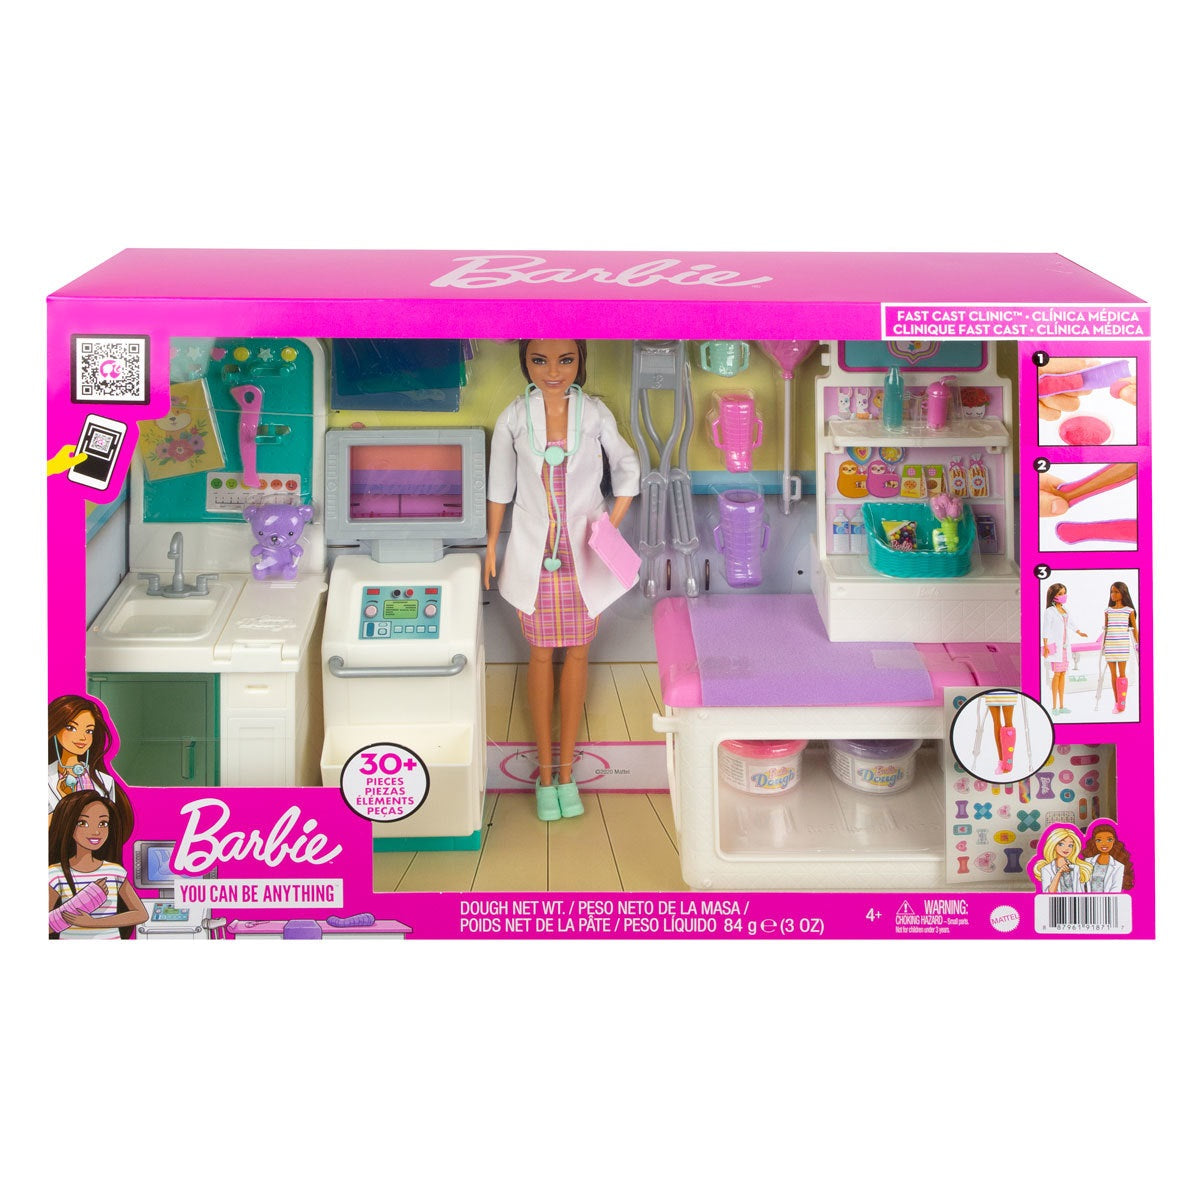 Barbie Fast Cast Clinic Playset and 30cm Doll